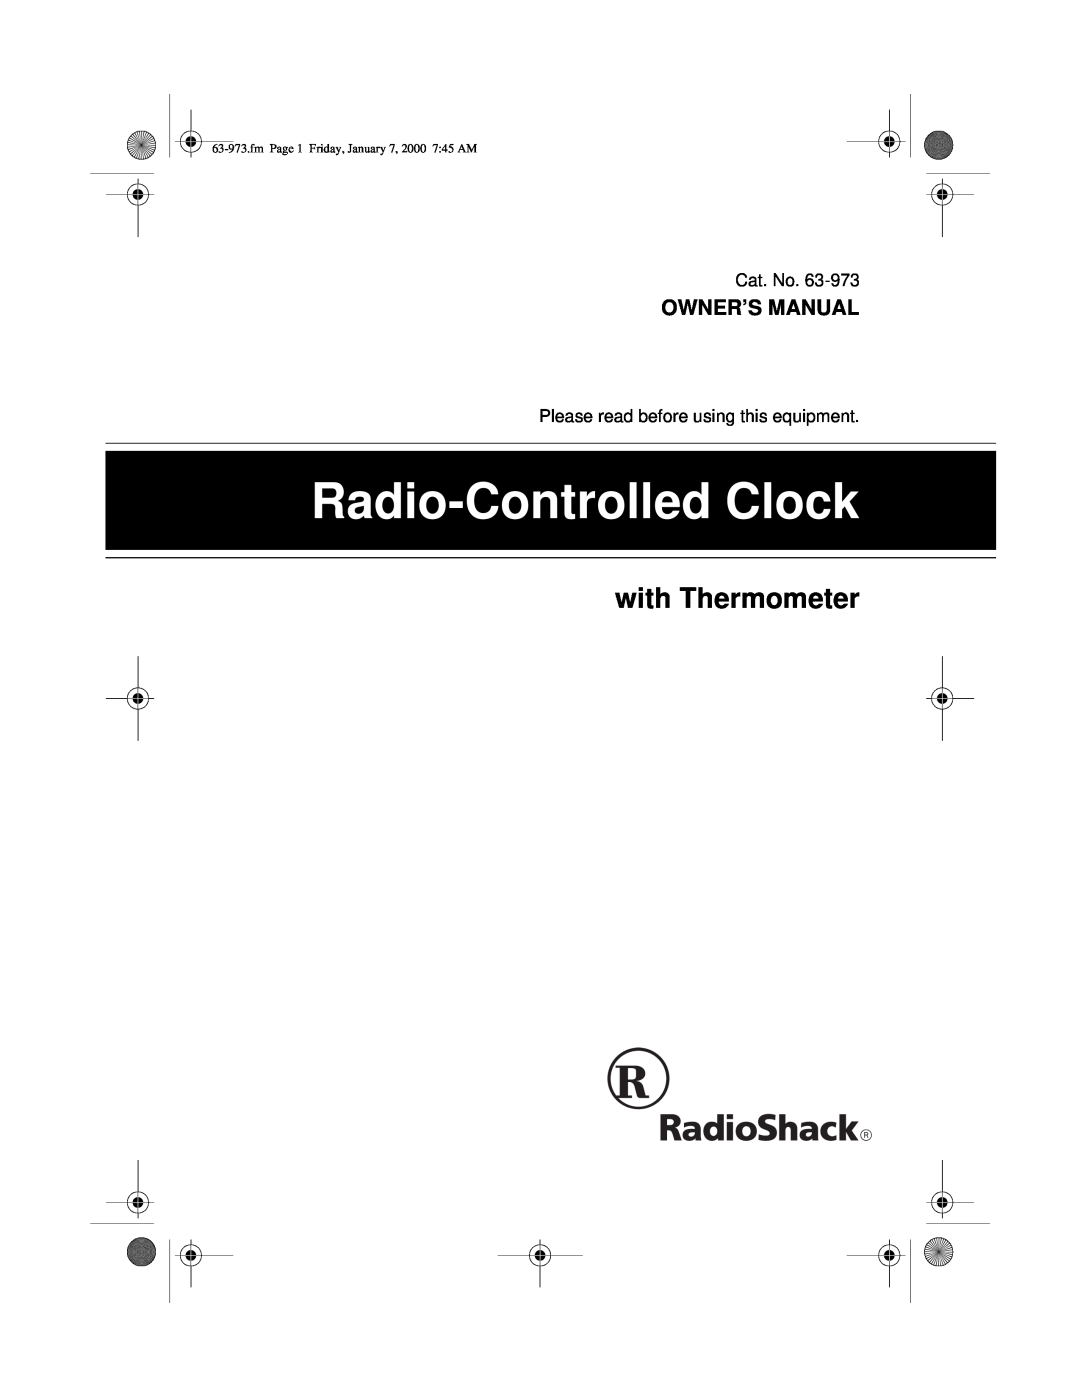 Radio Shack 63-973 owner manual with Thermometer, Radio-Controlled Clock, fm Page 1 Friday, January 7, 2000 745 AM 